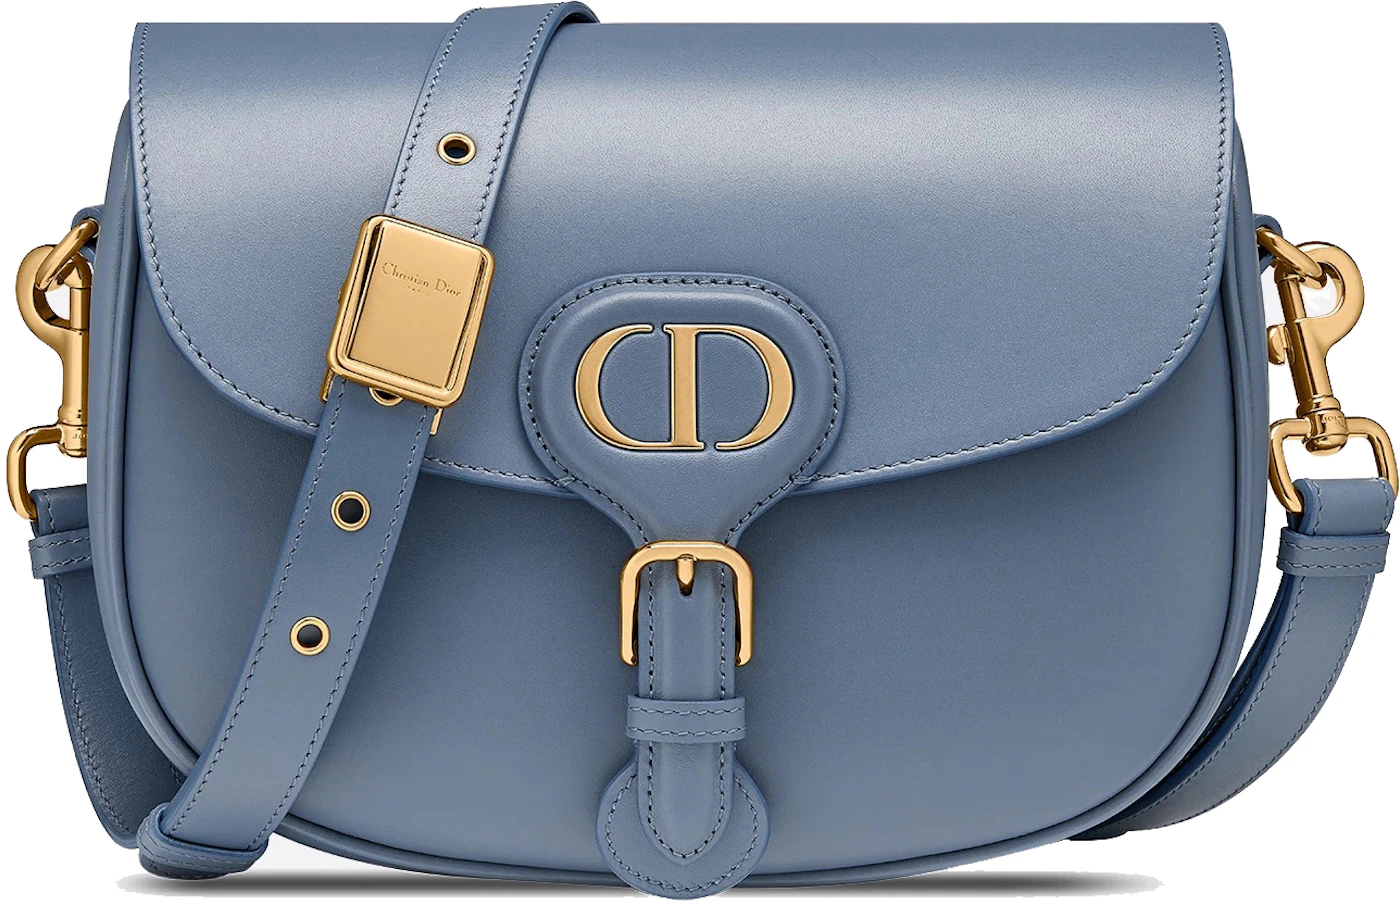 Dior Bobby Bag On Sale - Authenticated Resale